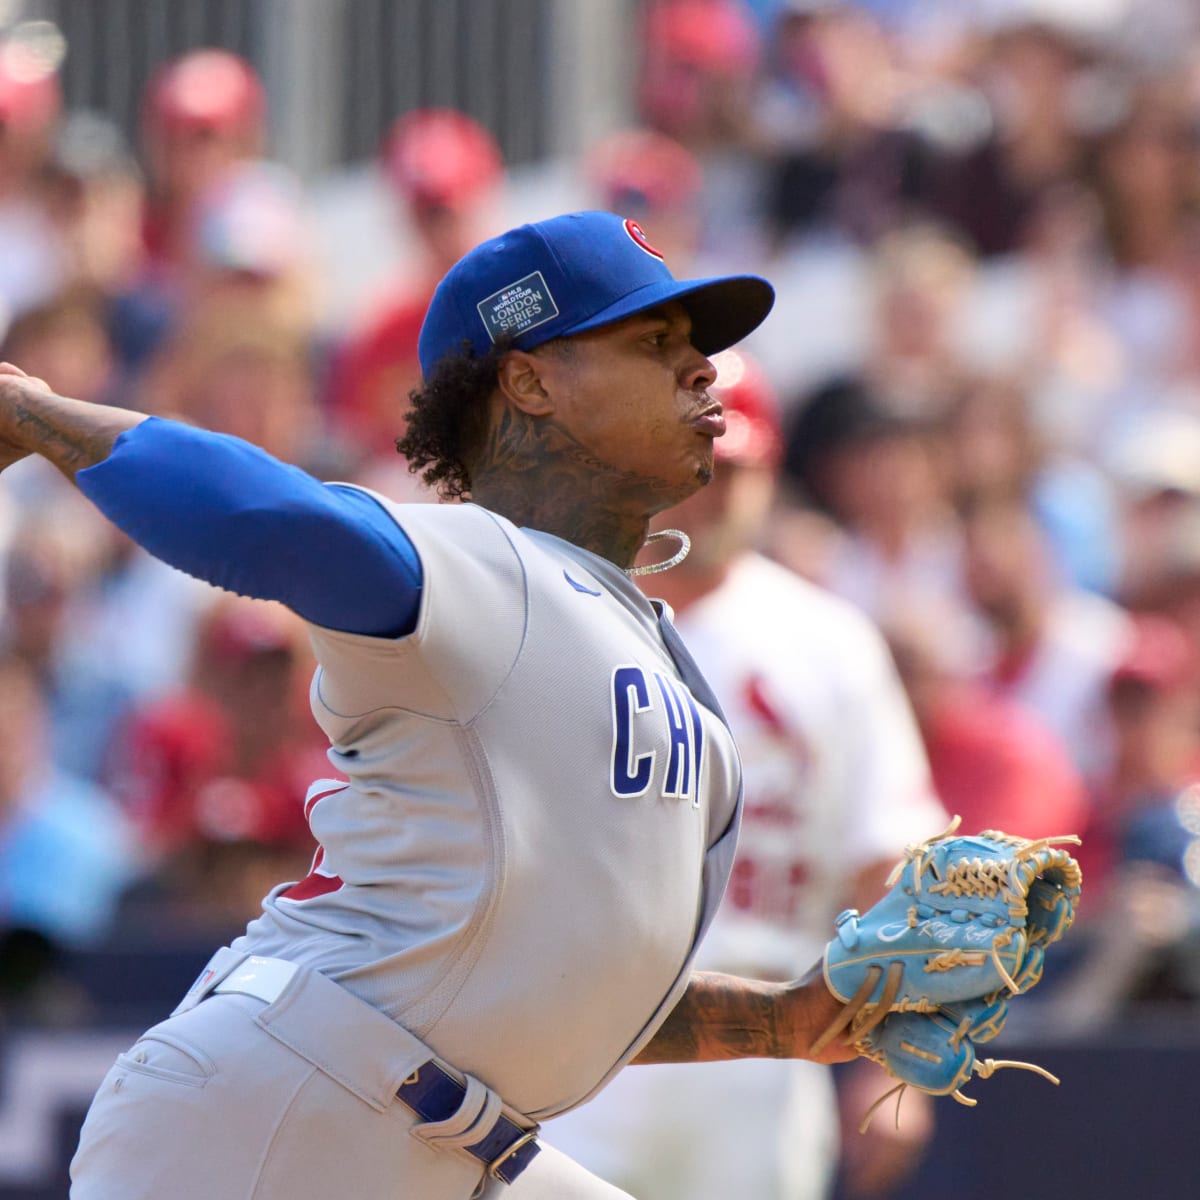 Marcus Stroman injury update: What happened to Marcus Stroman? Cubs star  $25,000,000 pitcher faces setback in injury recovery